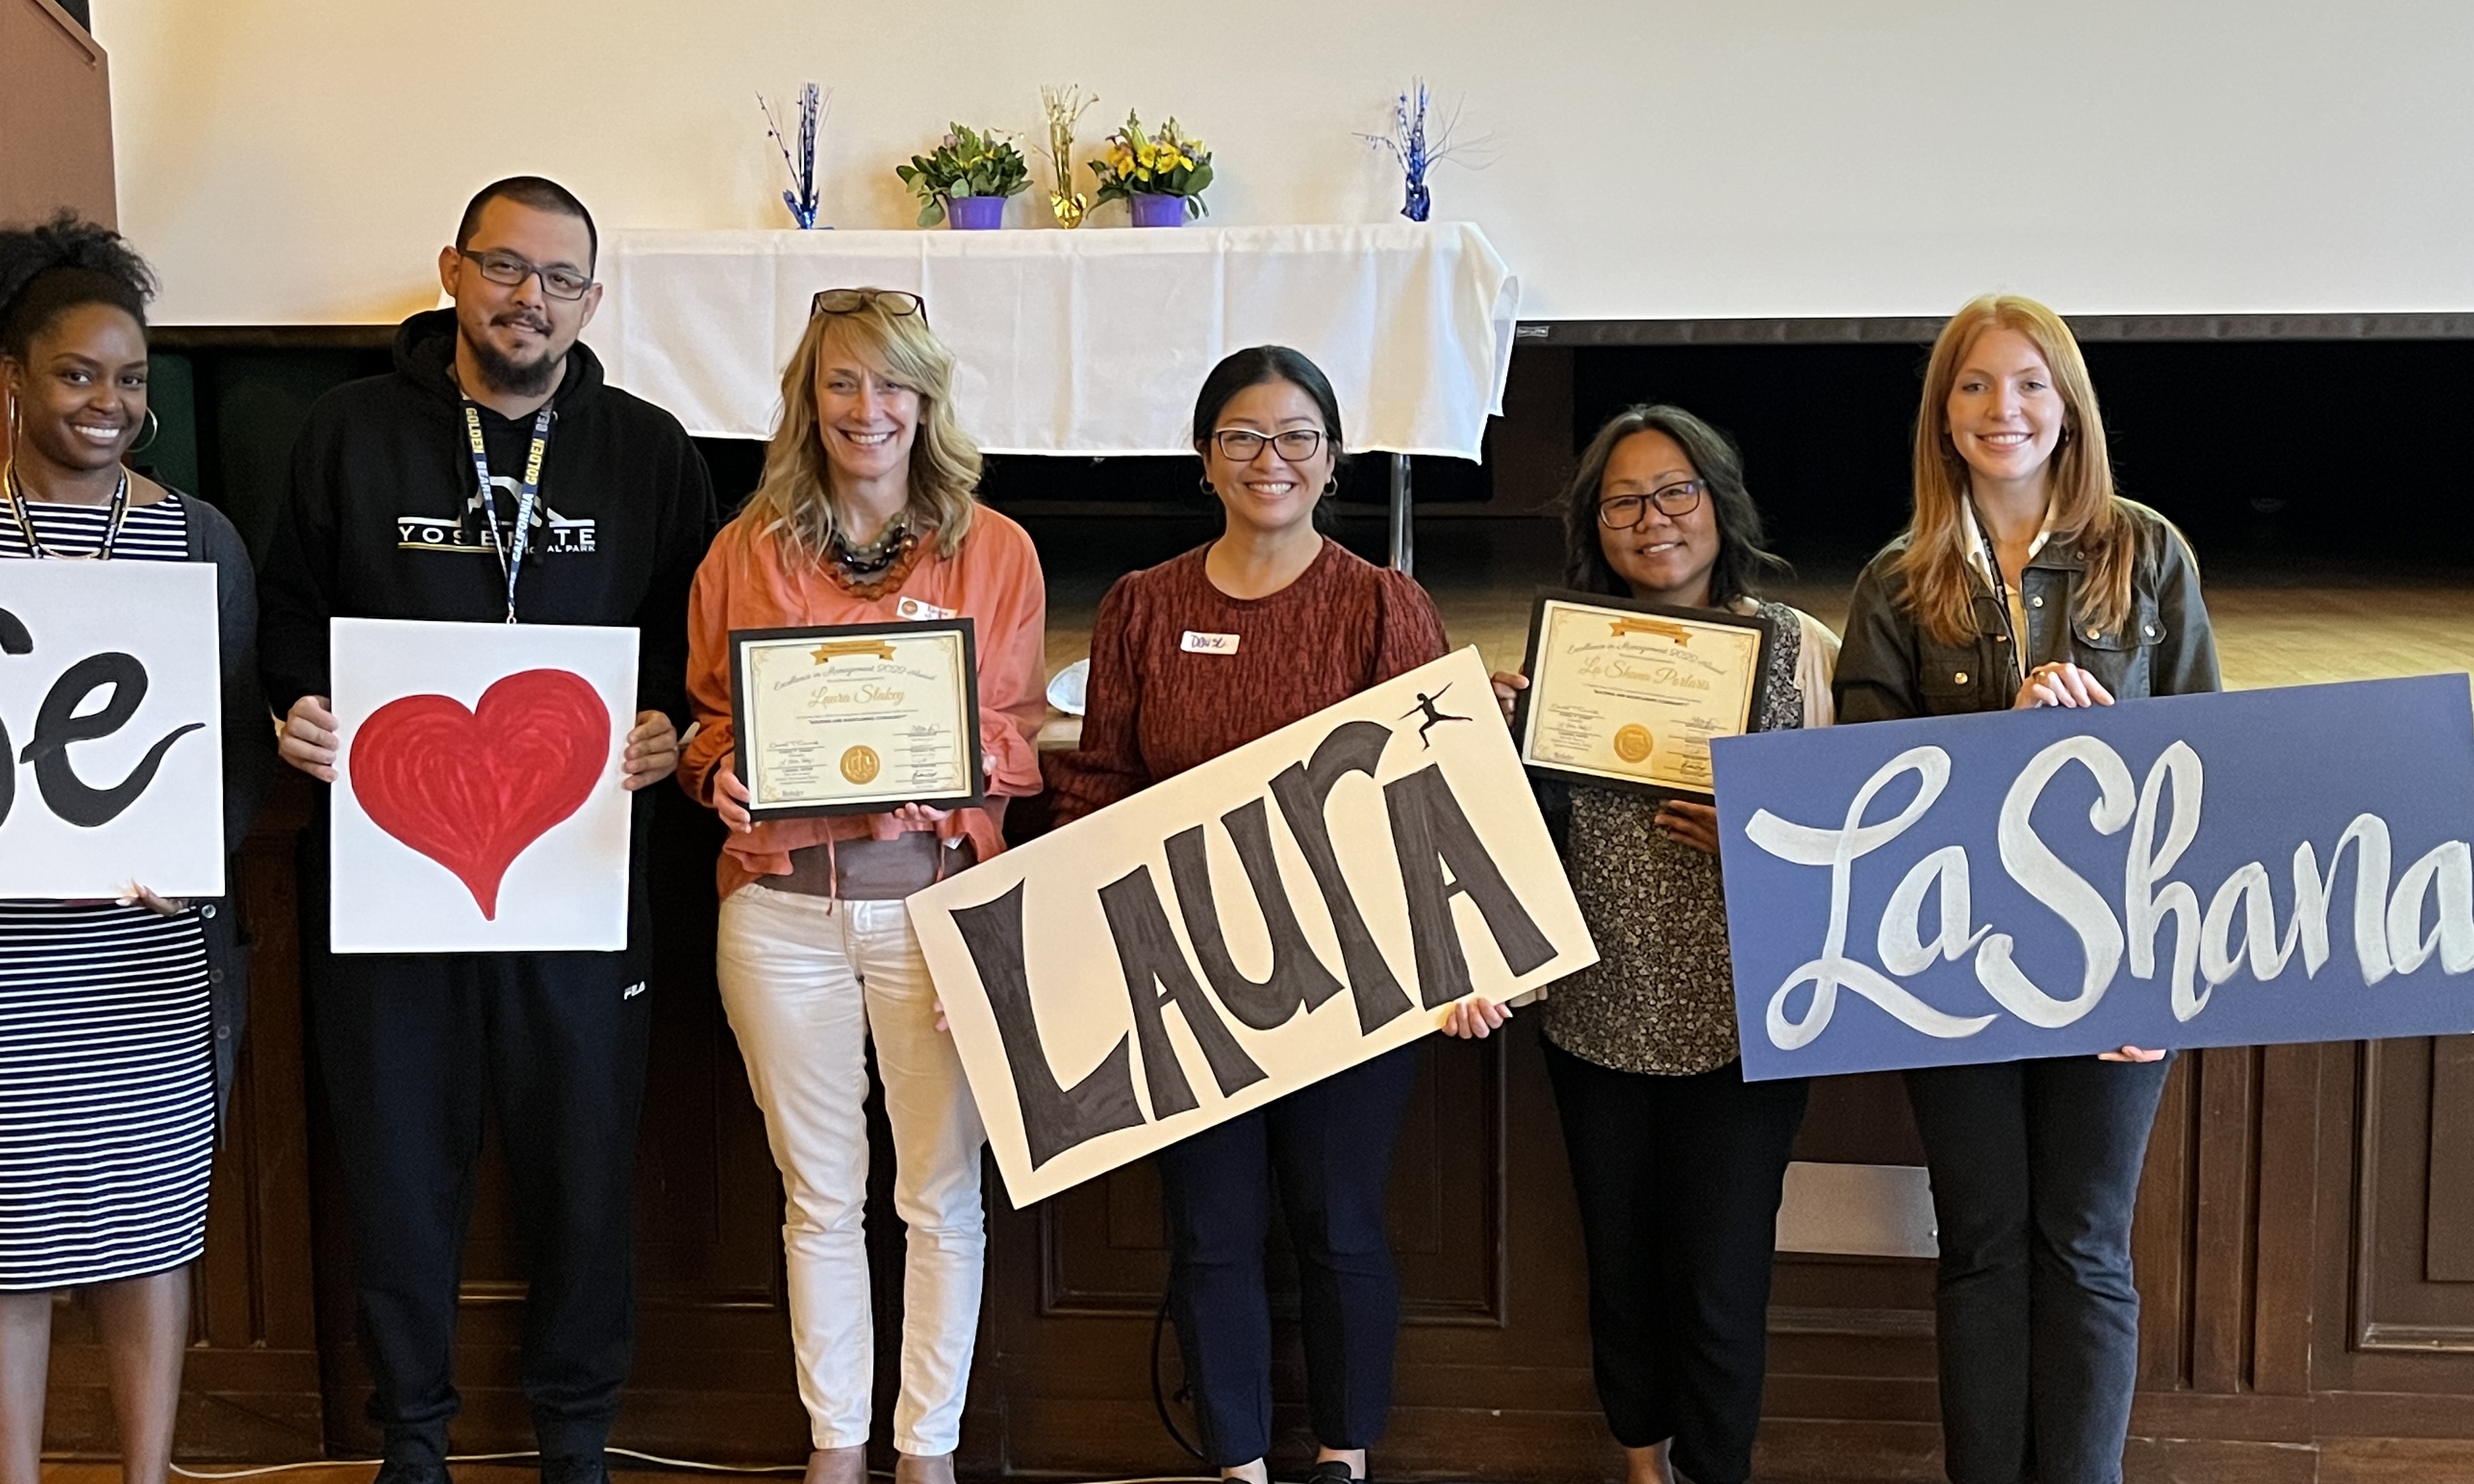 Photo of staff at EIM awards ceremony holding signs we heart Laura La Shana